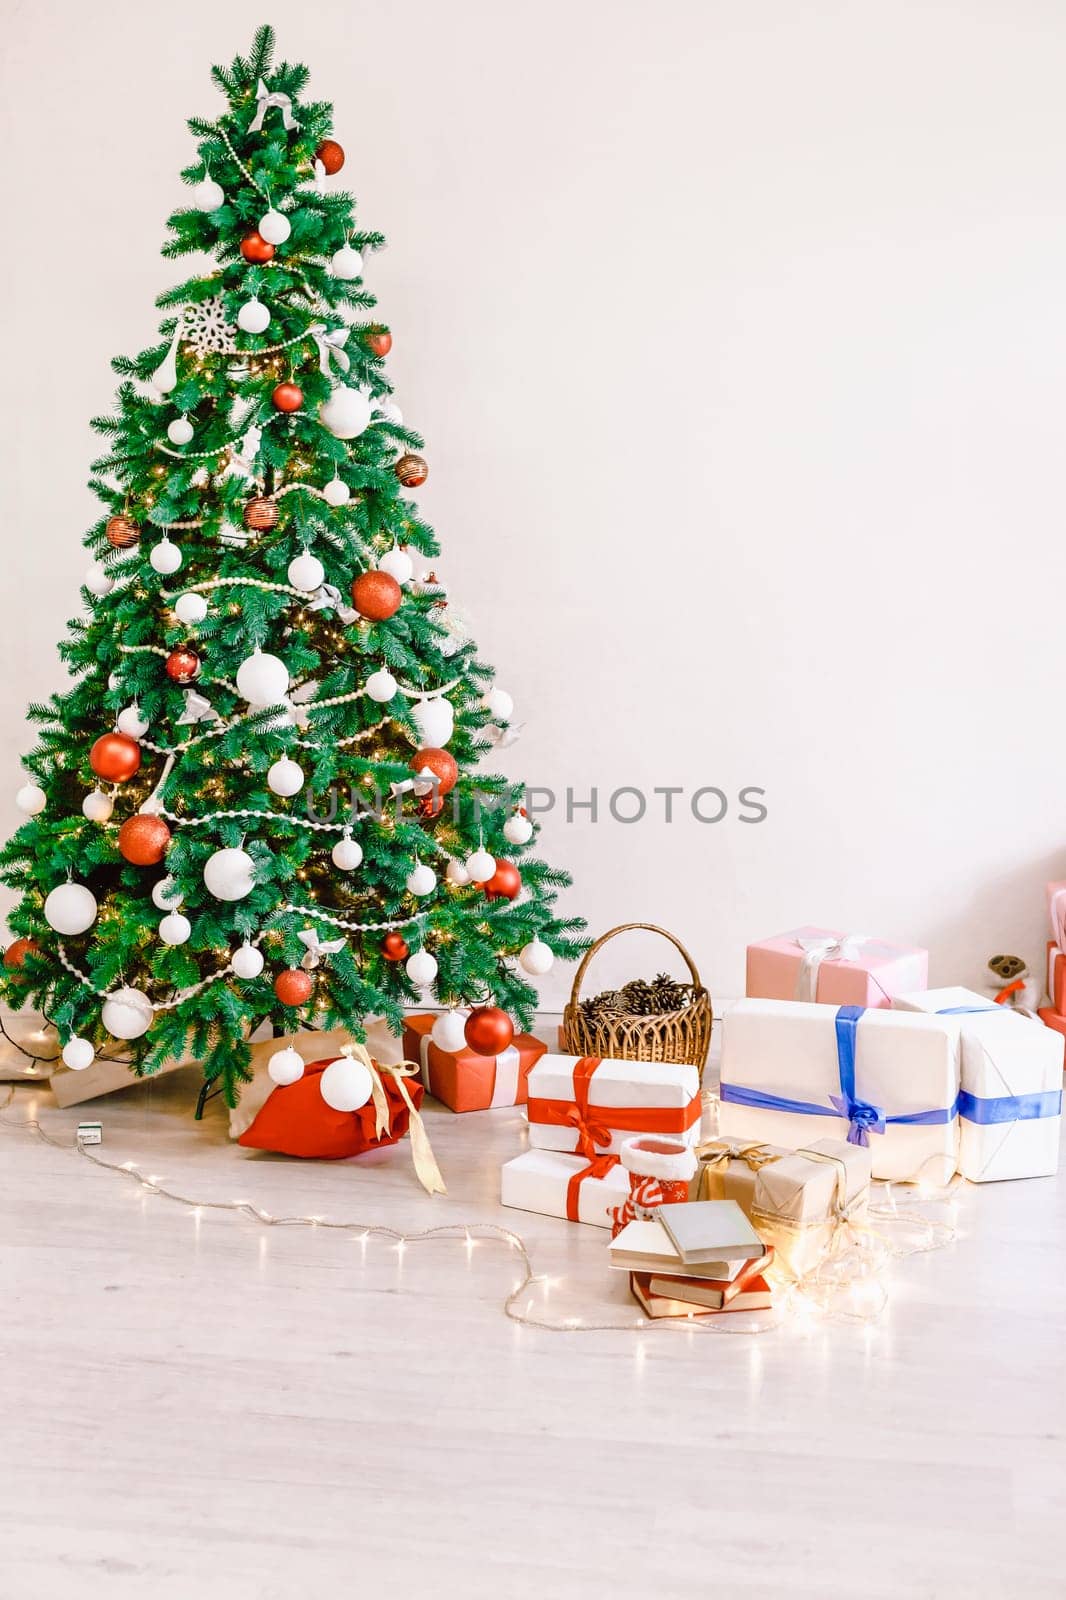 Christmas tree blue lights new year holiday gifts Garland white home